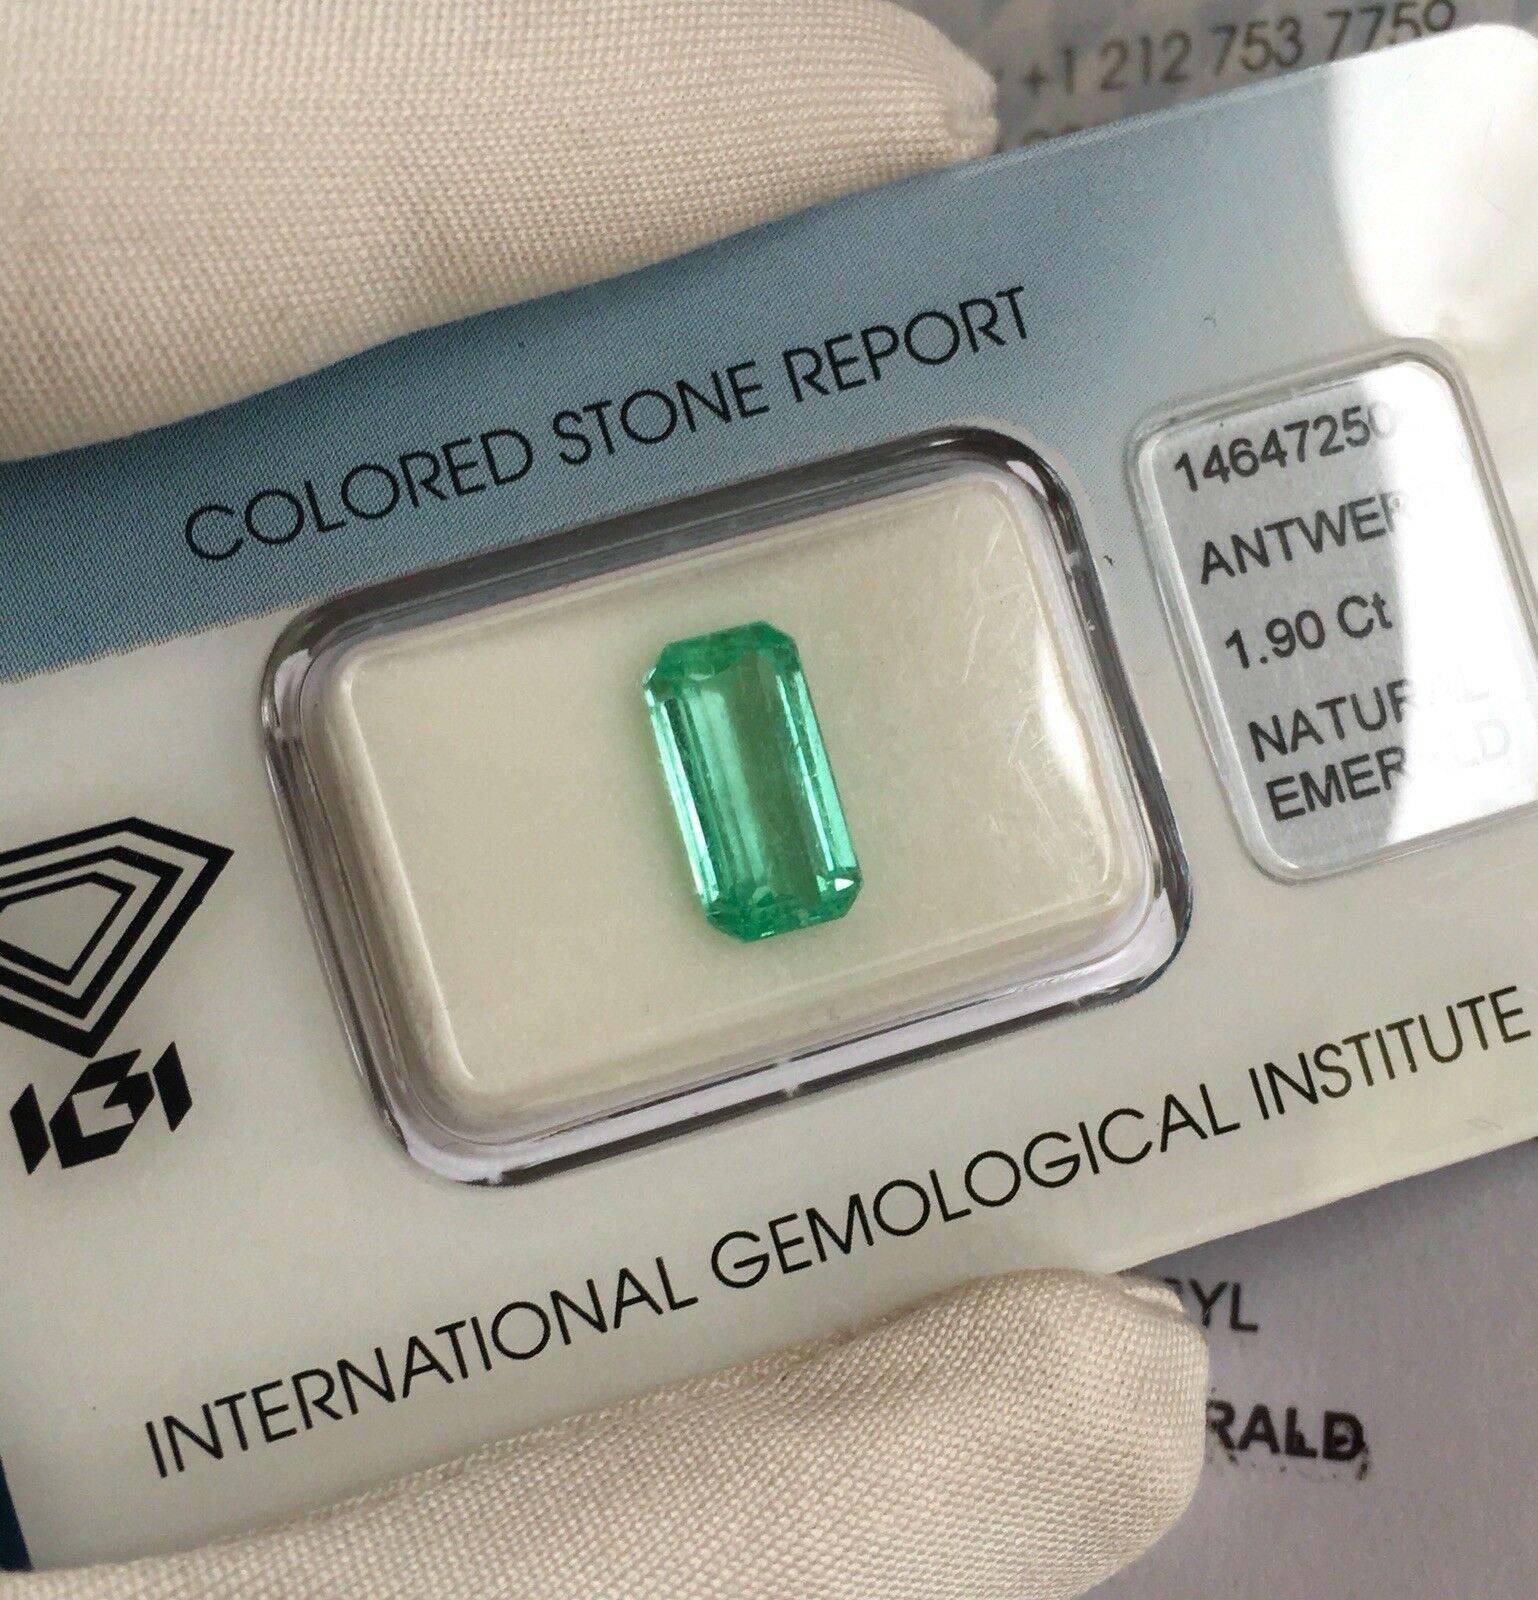 Natural loose Colombian emerald.
1.90 carat stone, with a stunning bright green colour. 

Fully certified by IGI in Antwerp, one of their best and most well equipped gem labs.

Has a very good emerald cut with an ideal polish to show great shine and